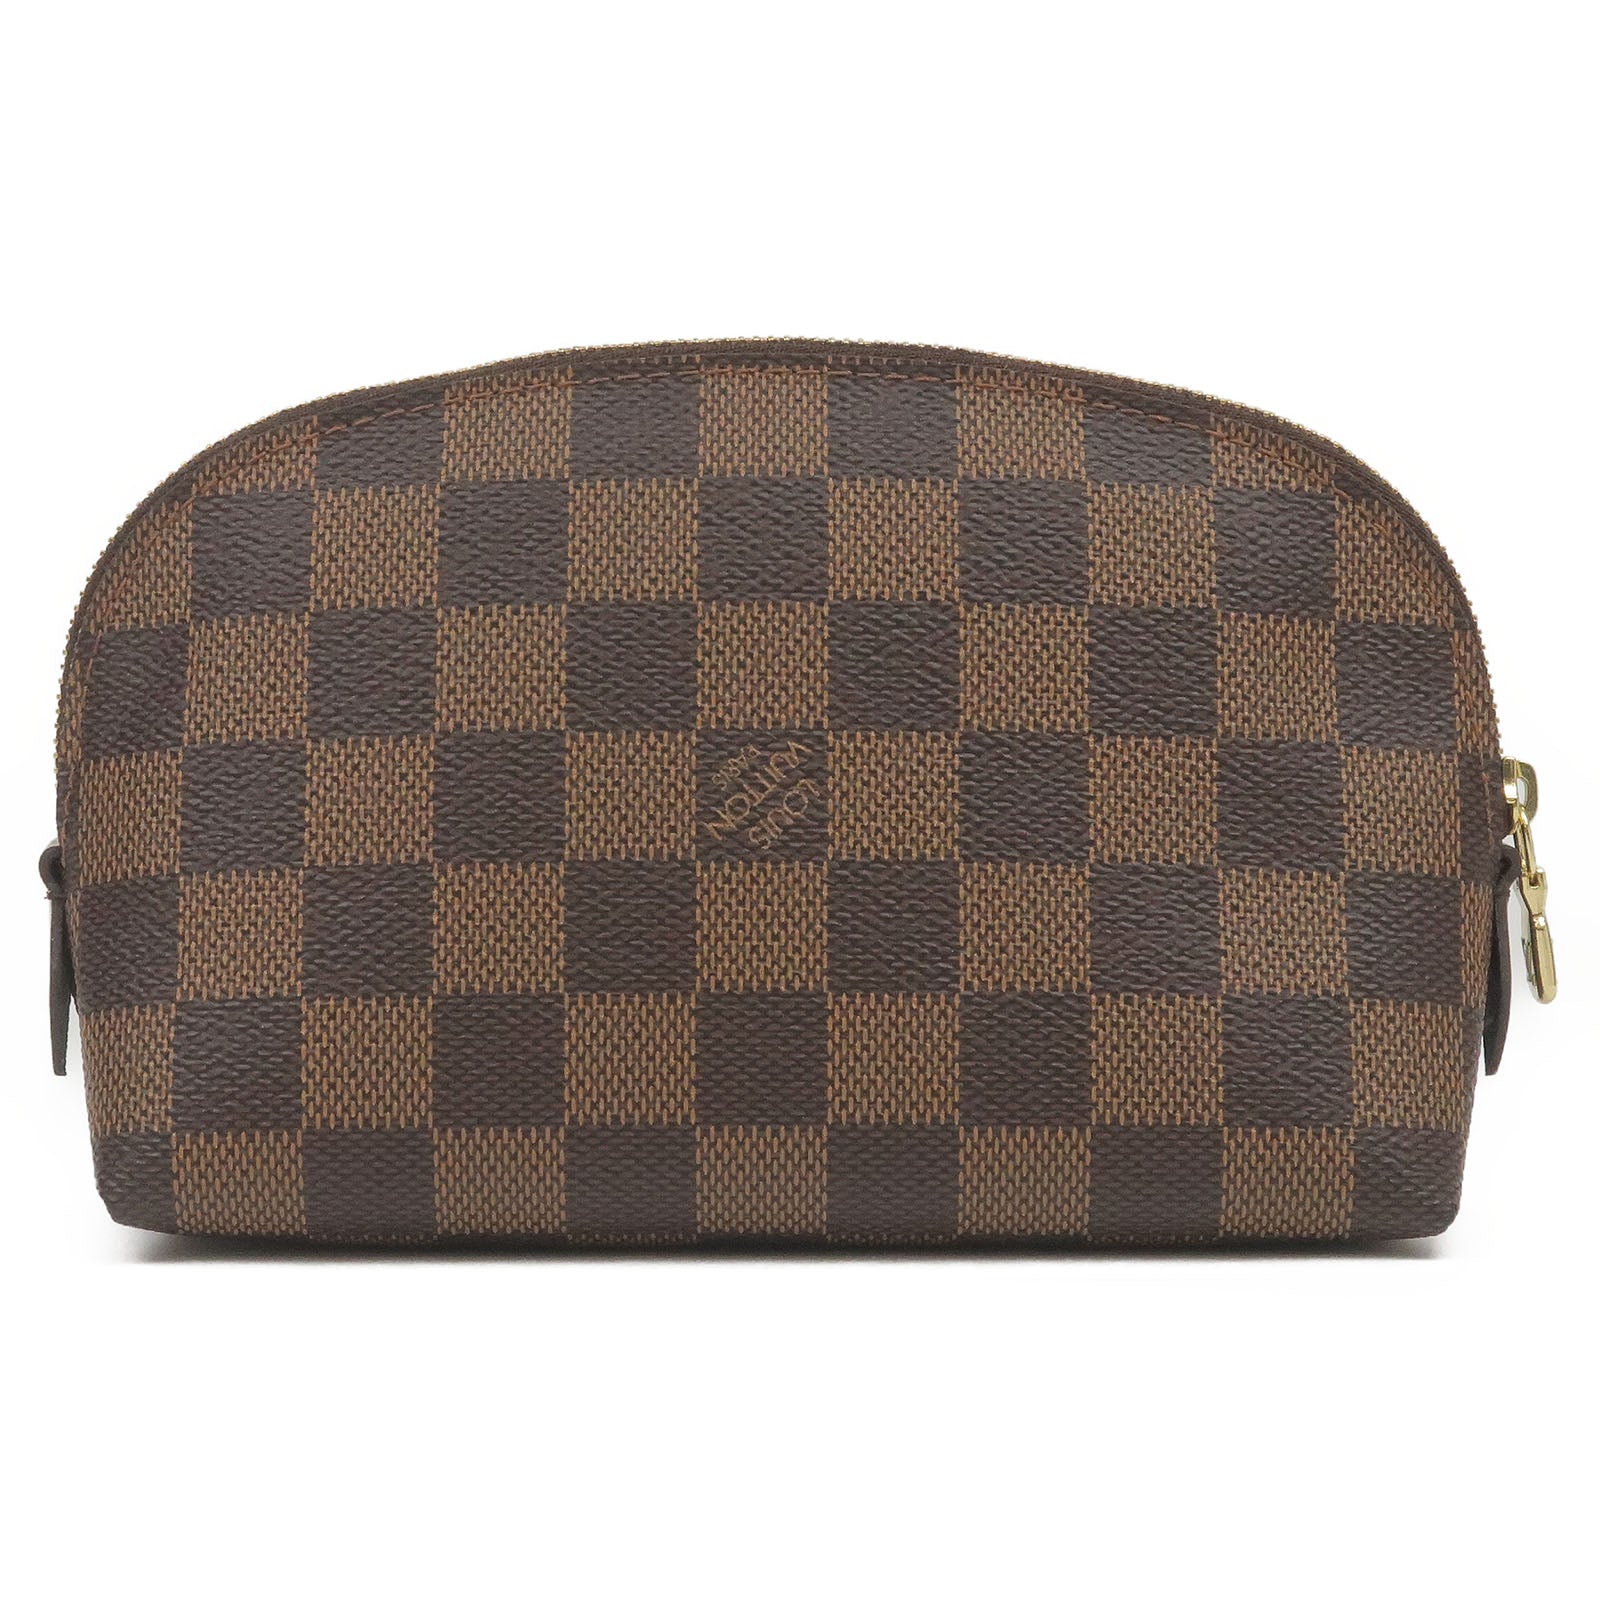 We Review The Louis Vuitton Toiletry Pouch in Damier Graphite